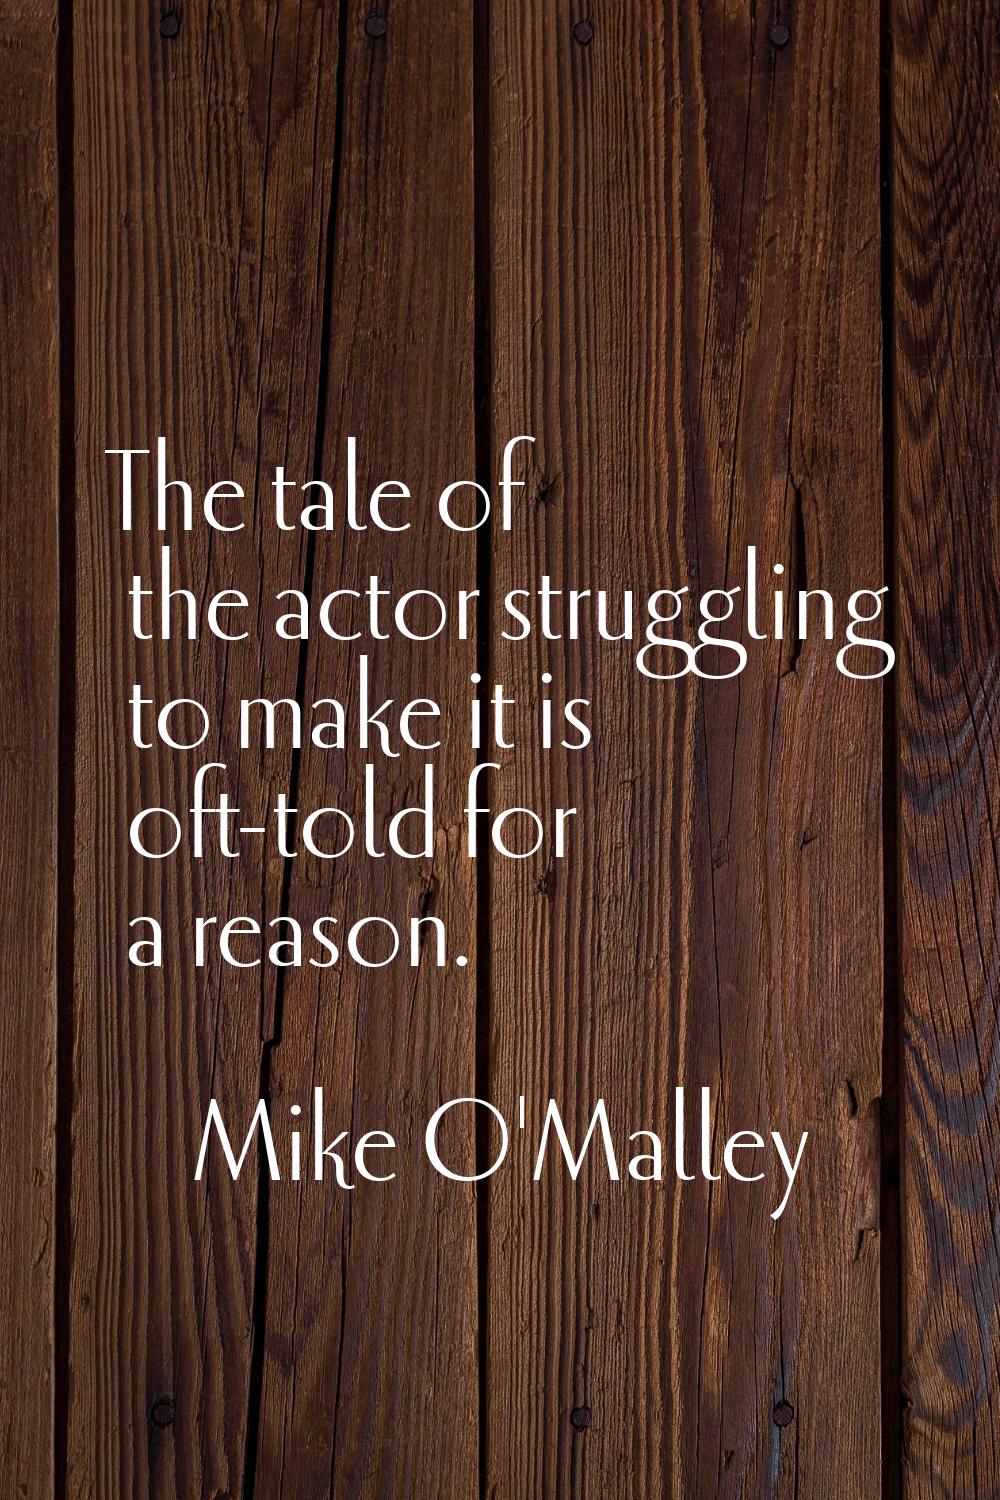 The tale of the actor struggling to make it is oft-told for a reason.